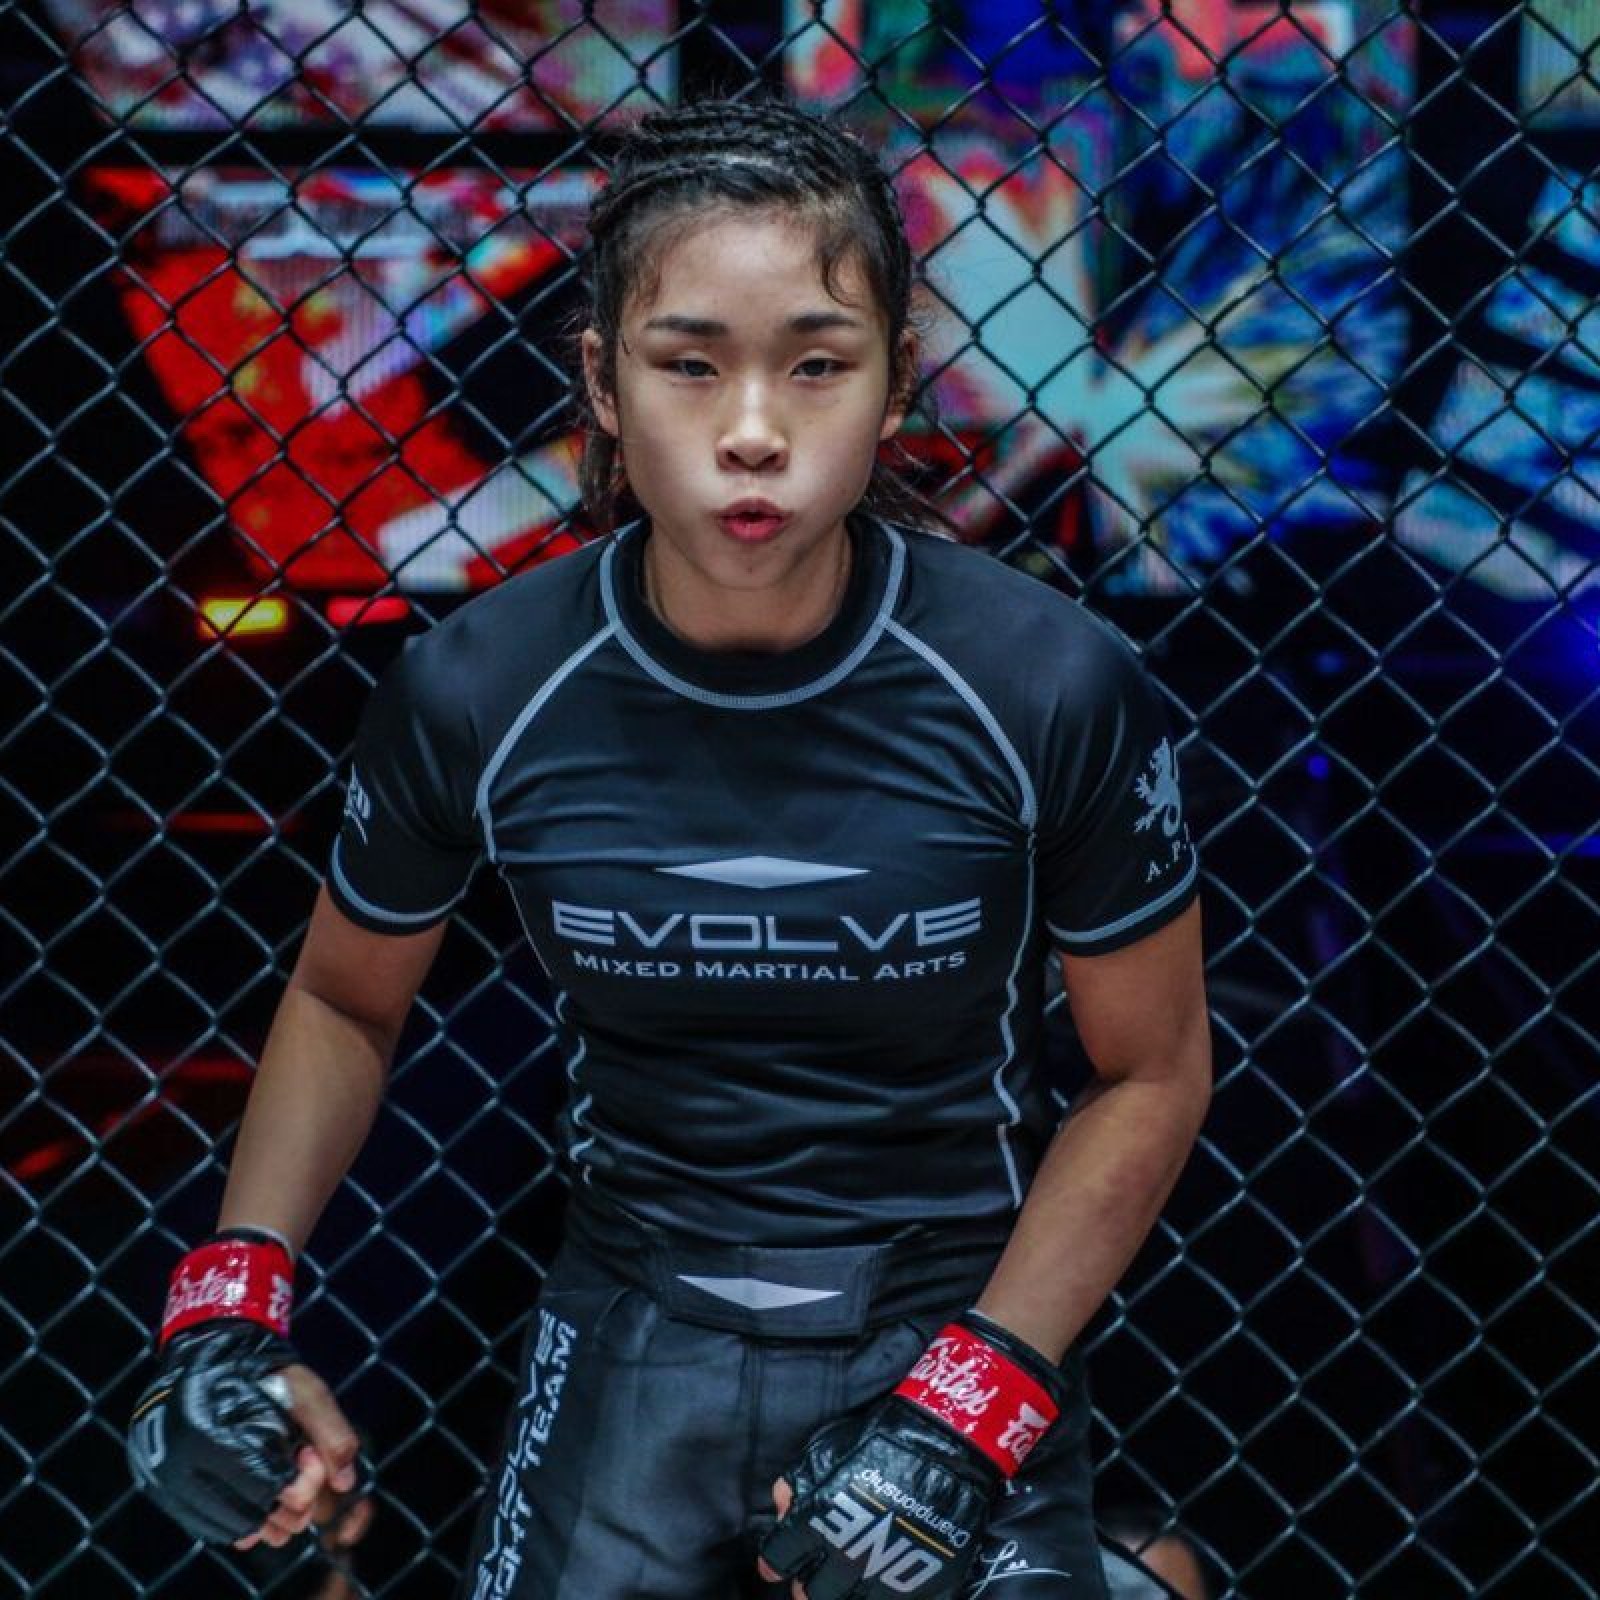 MMA Prodigy Victoria Lee Passes Away At Age 18